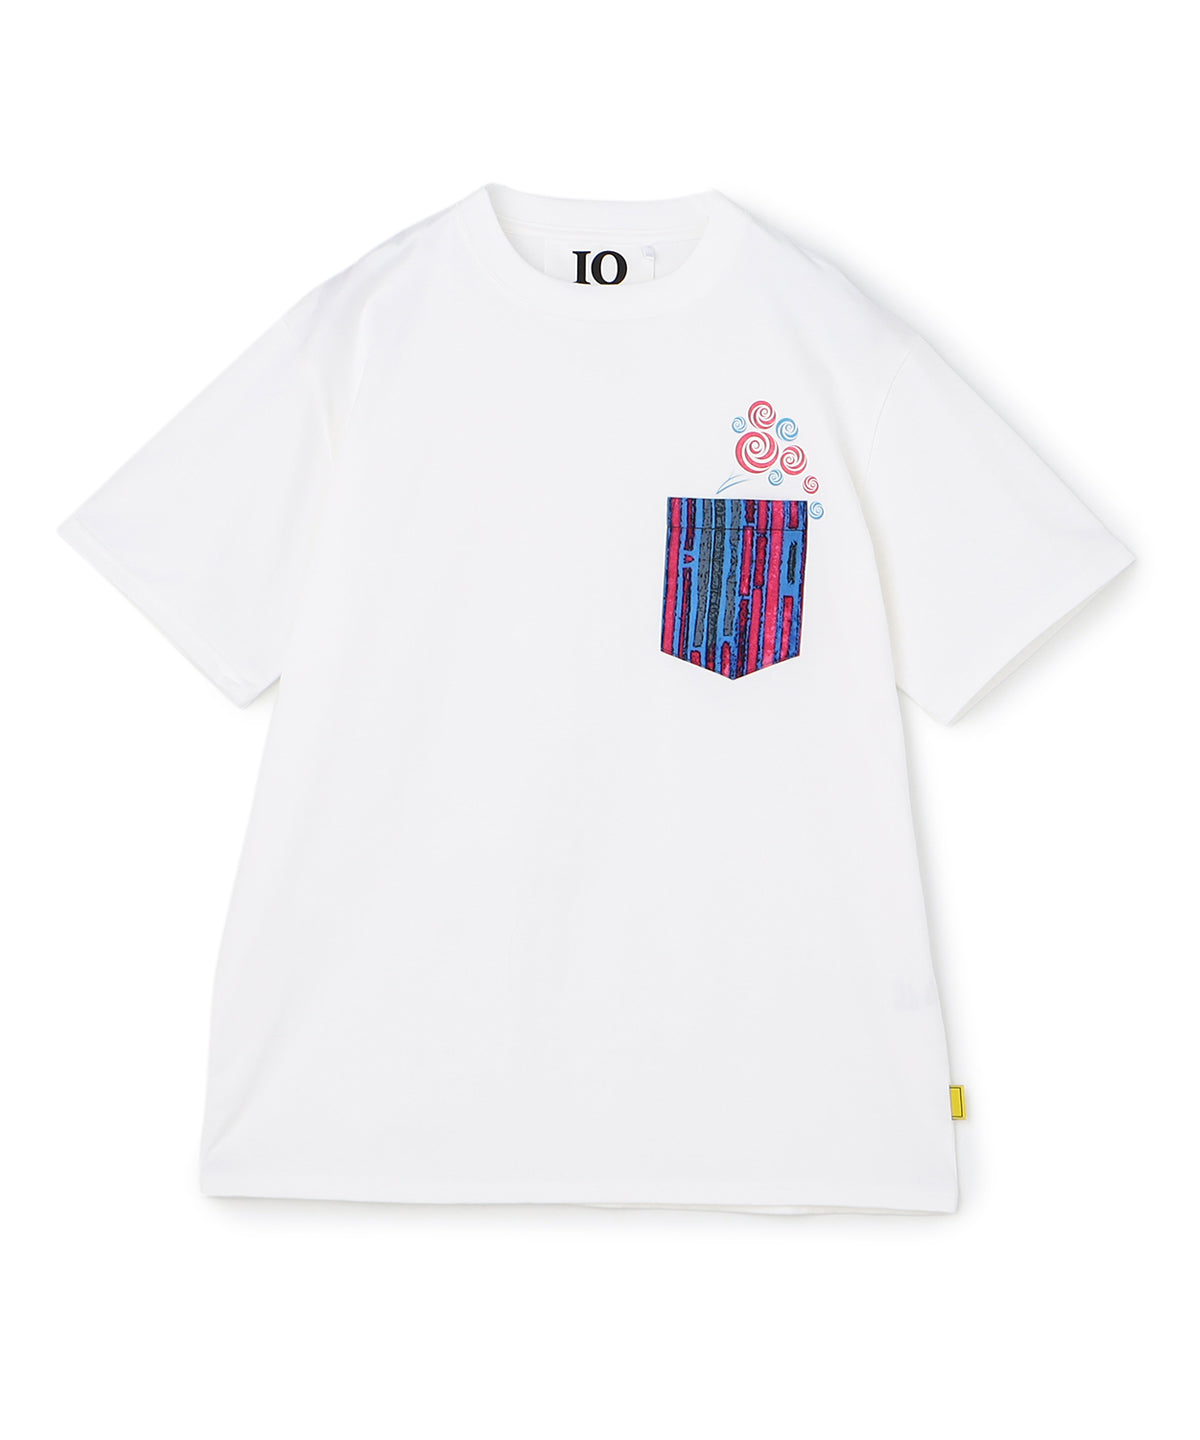 Printed Pocket T-SHIRTS Rose 406 WHITE | Tシャツ | CLOUDY公式通販 